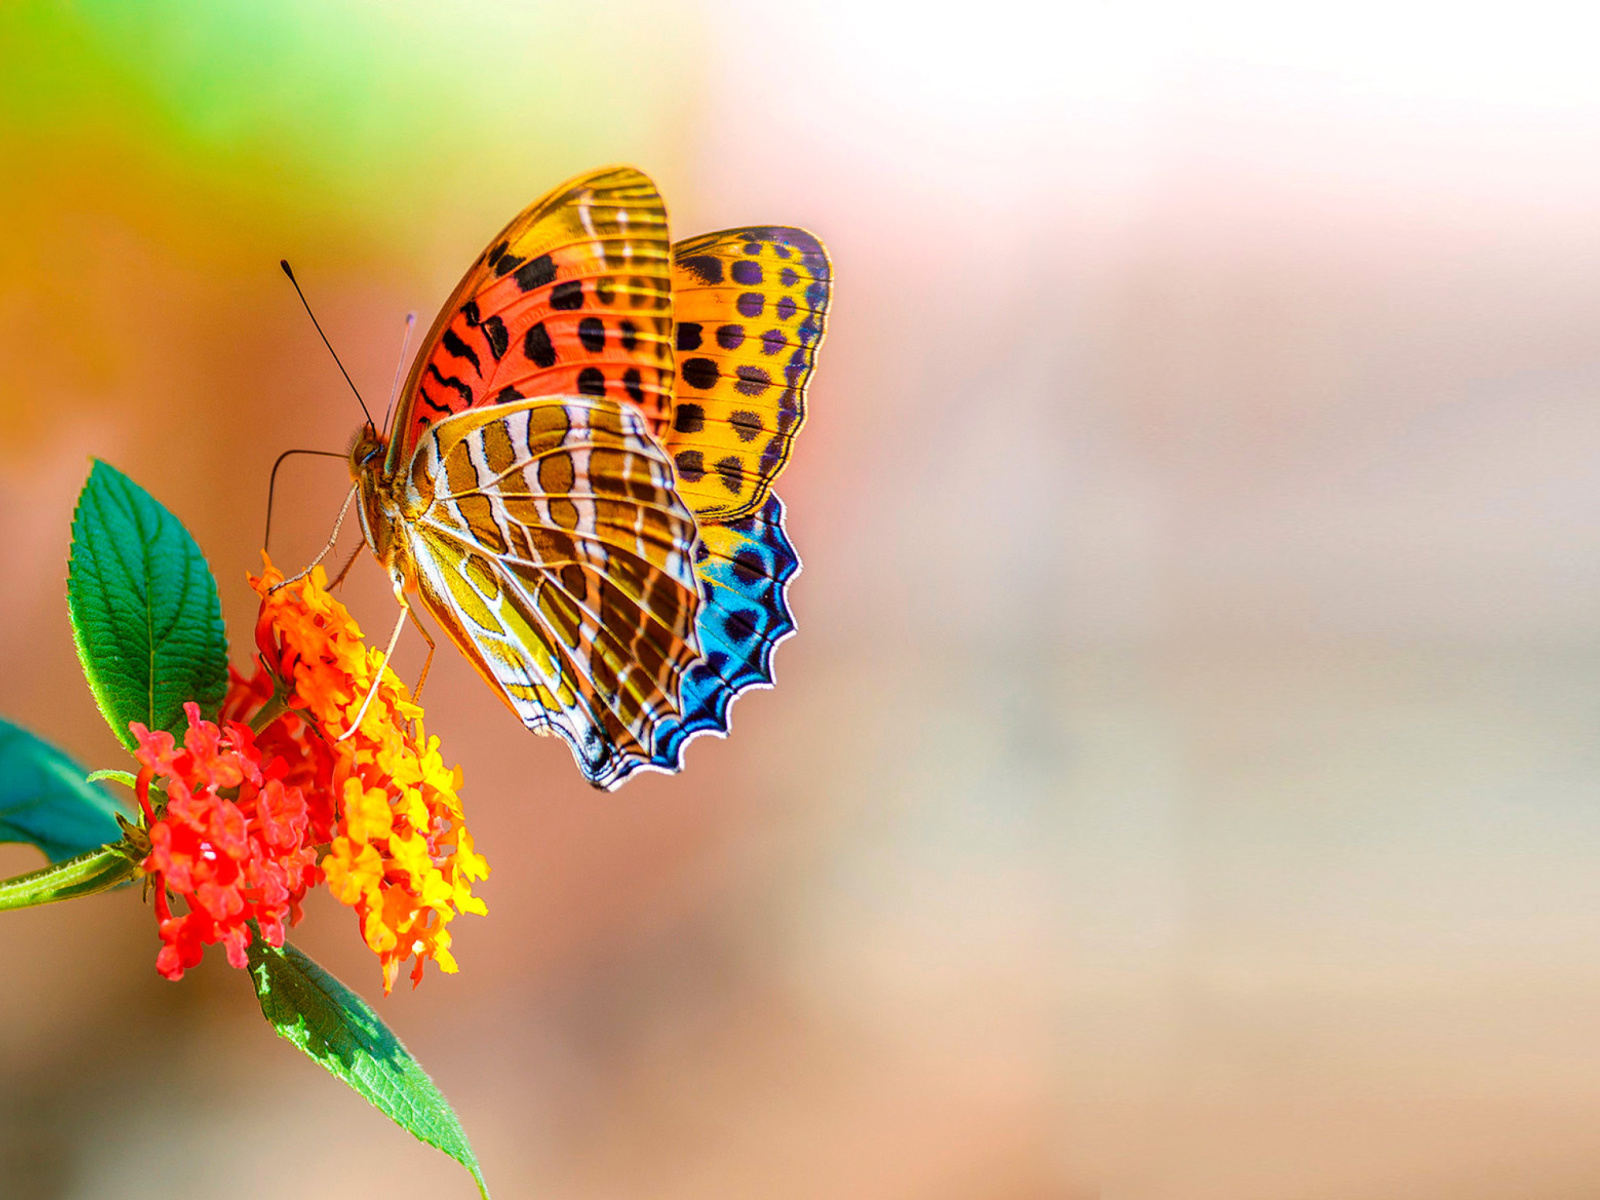 Colorful Animated Butterfly screenshot #1 1600x1200